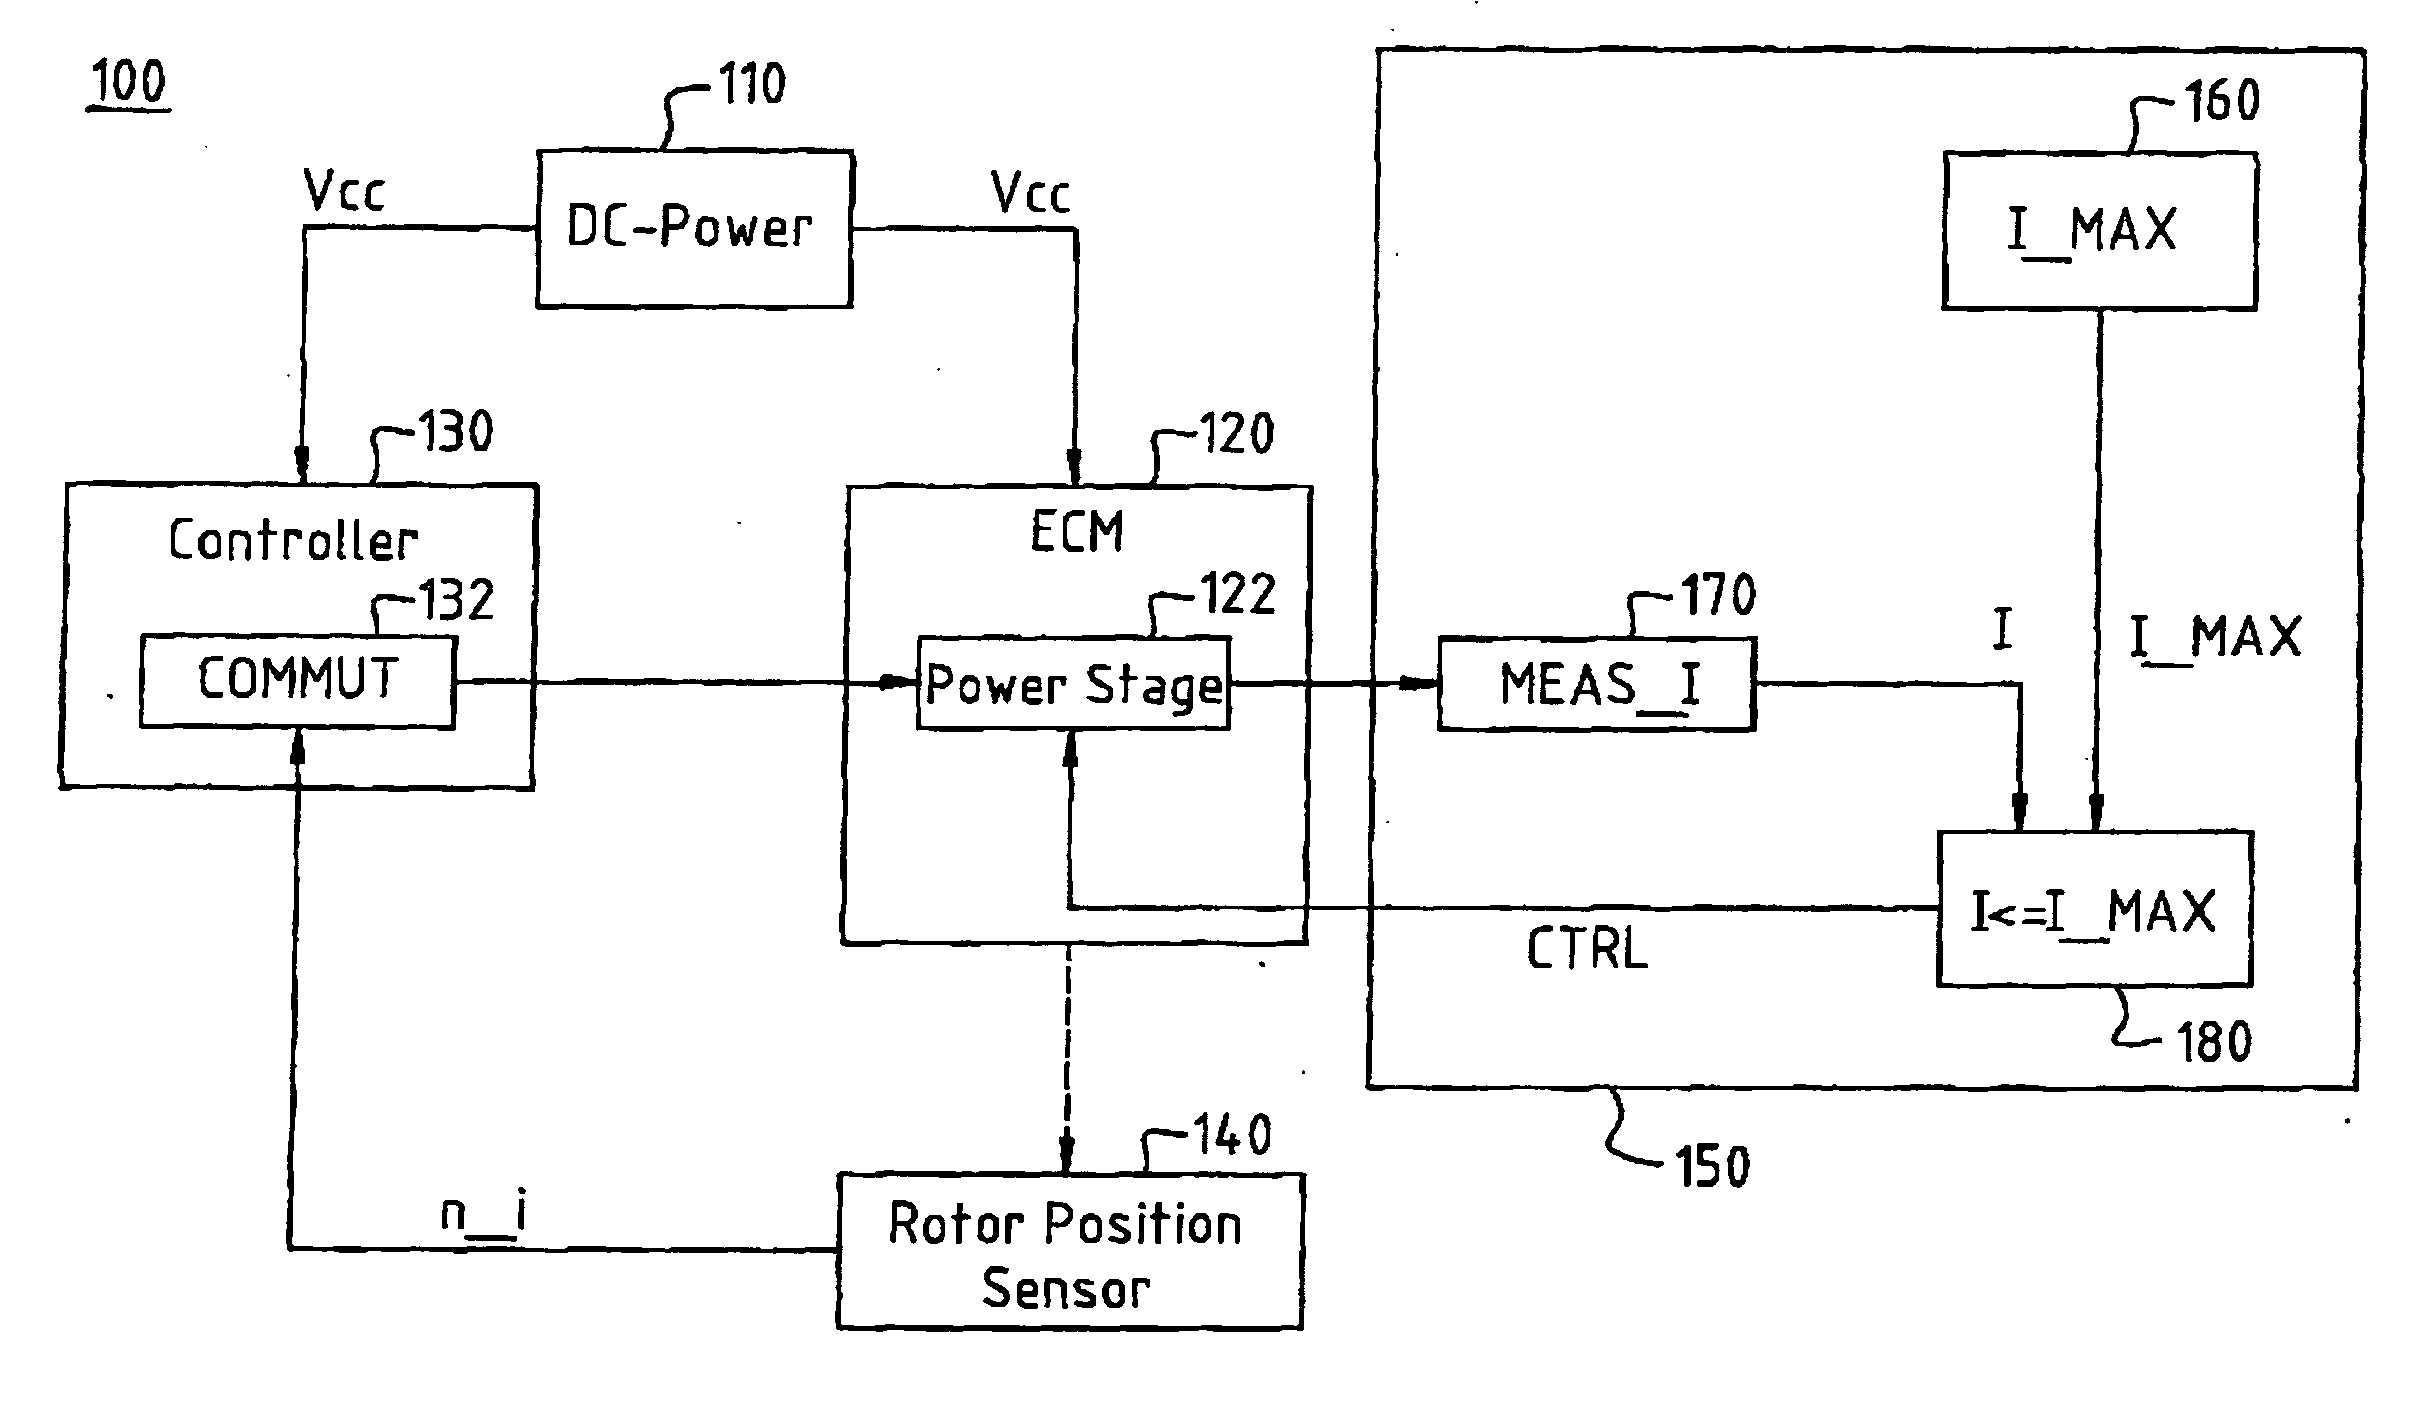 Control Circuit for an Electronically Commutated Motor